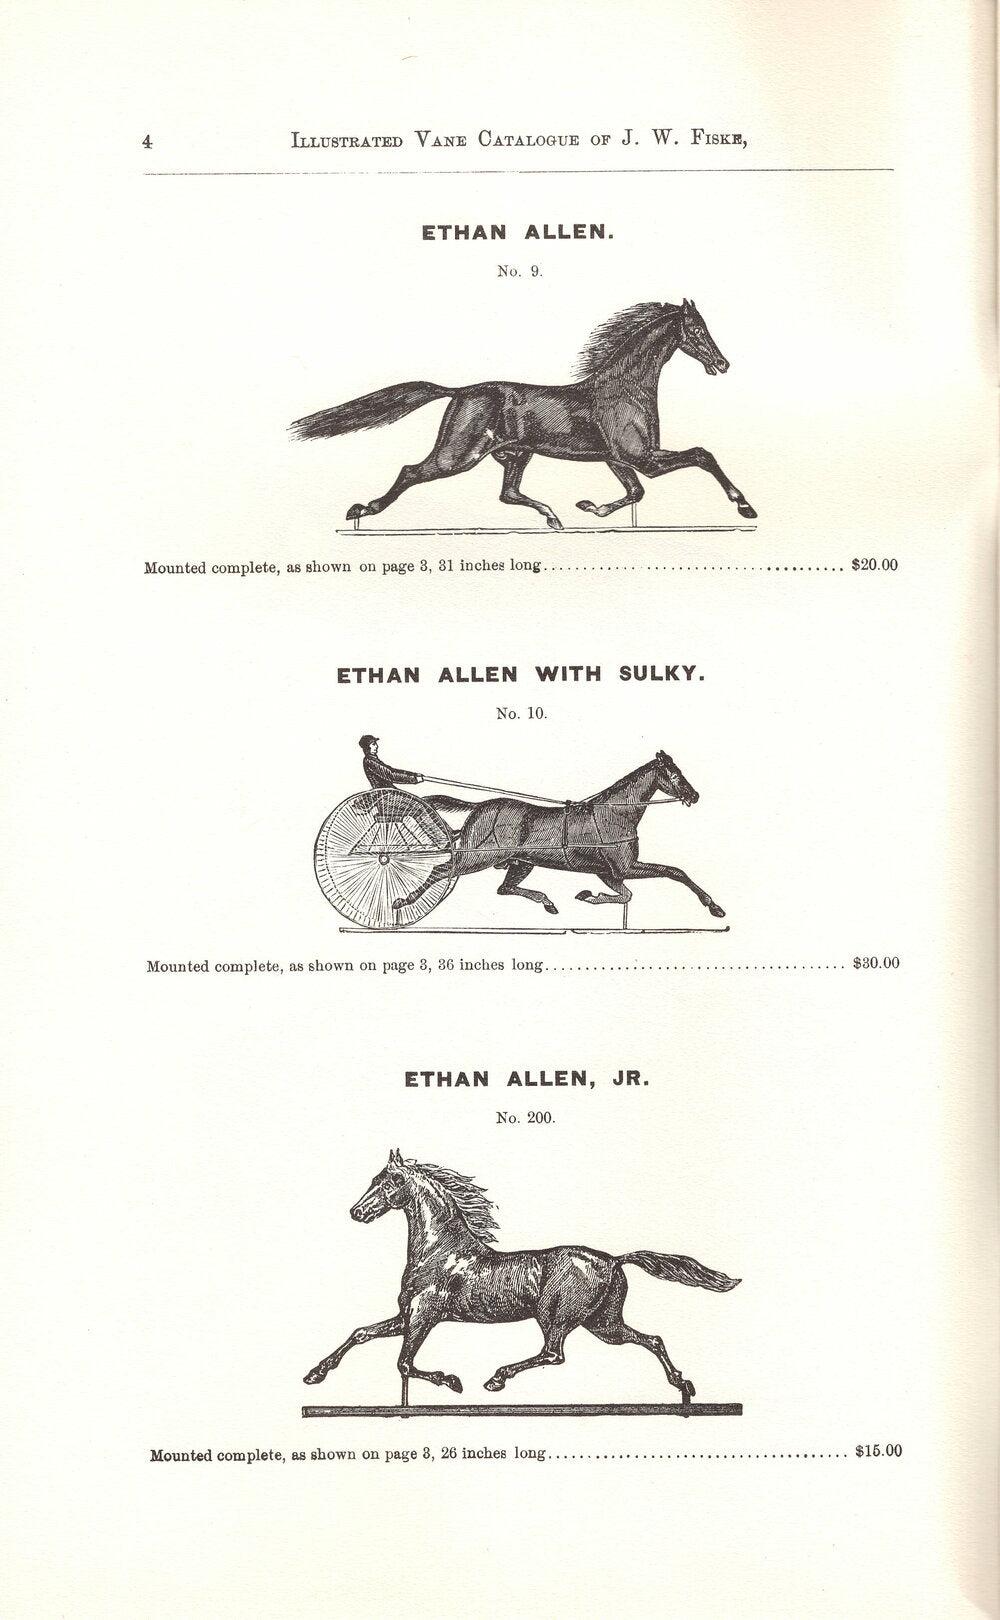 Illustrated Weathervane catalogue by J.W. Fiske circa late-19th Century featuring the "Ethan Allen" models.